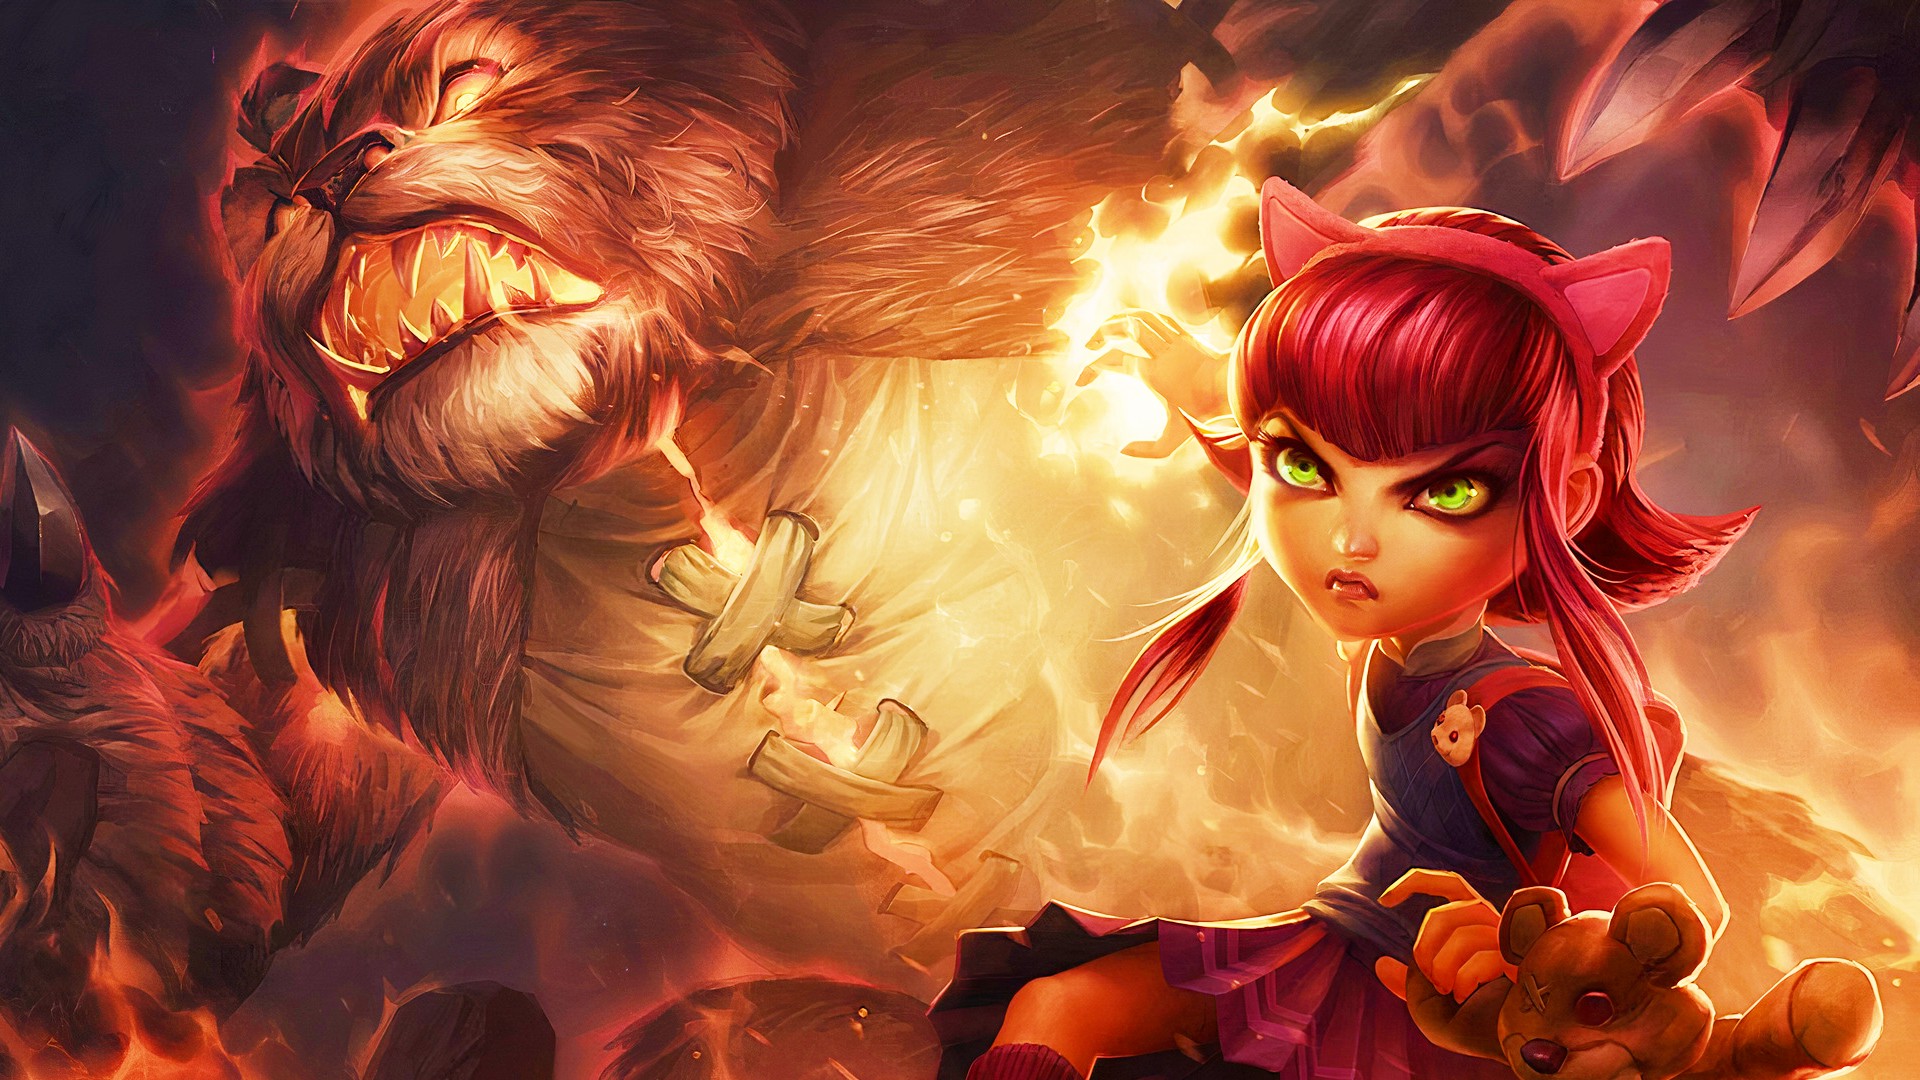 The Reworks of League of Legends Ranked BEST to WORST 